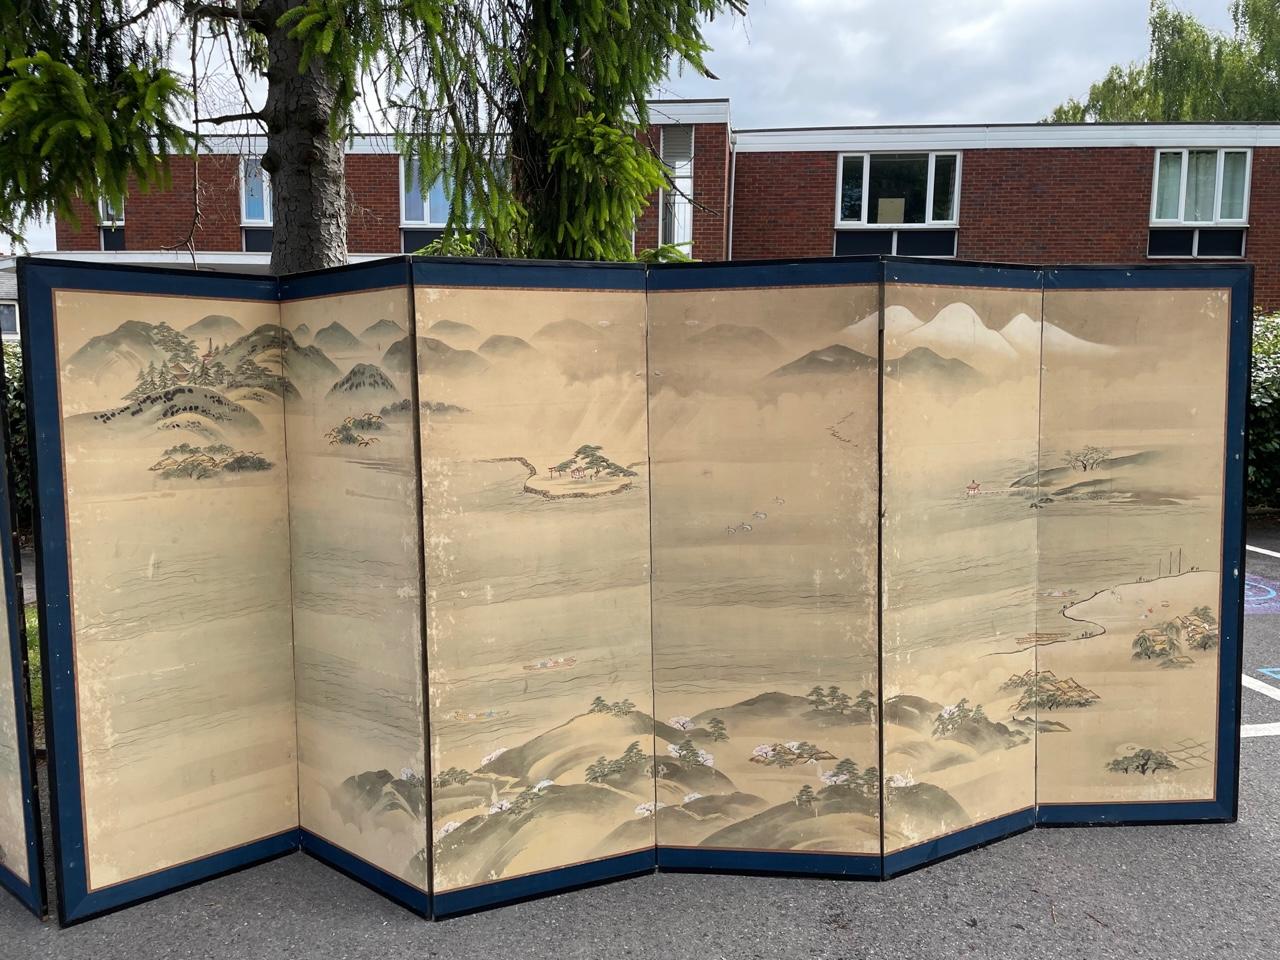 A pair of large 19th century Japanses Screens of Japanese scenery.

The screens also come with a wooden crate which would have been built for them at a later date in order to move them around safely.

The screens do come with some ware and very